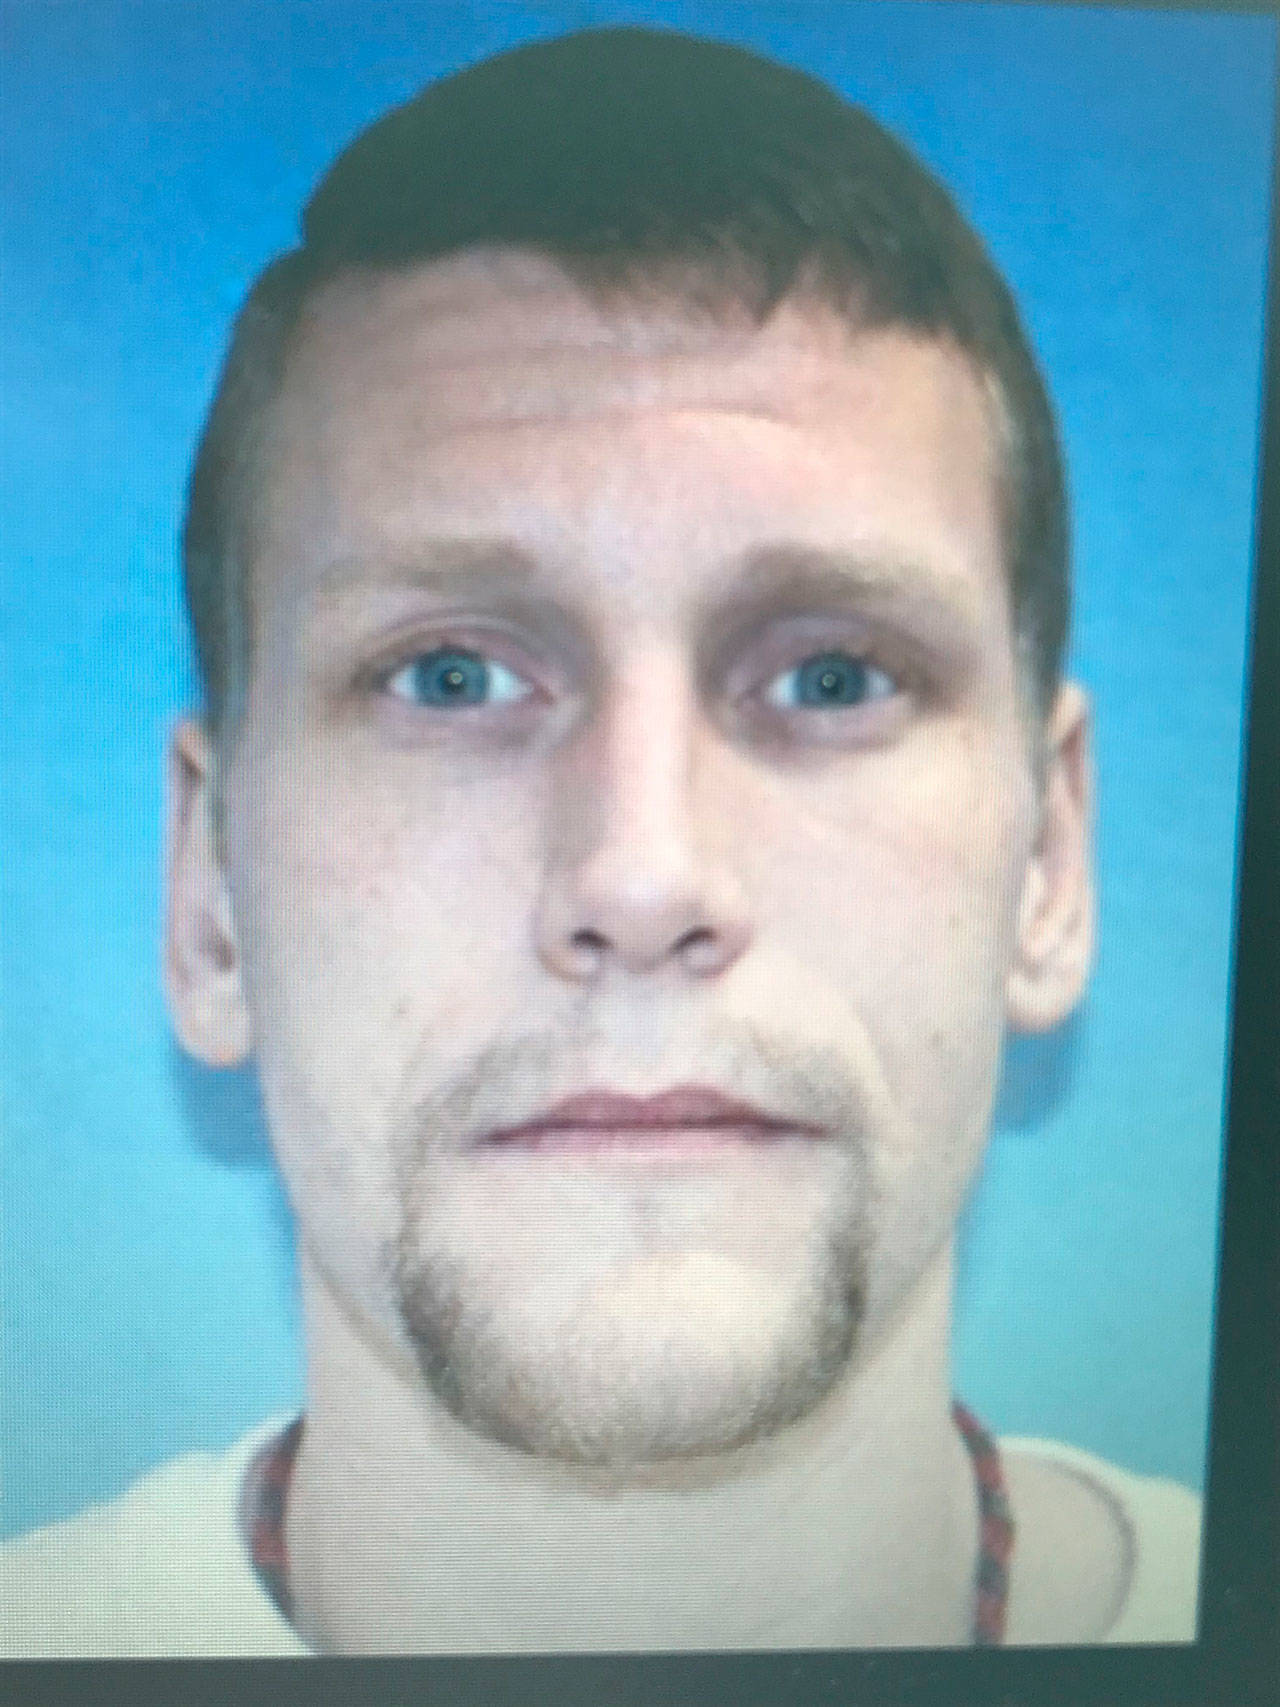 Deputies with the Clallam County Sheriff’s Office are seeking the whereabouts of Steven Goodman in connection with an Aug. 17 traffic stop that yielded a cache of drugs and a shotgun. Photo courtesy of Clallam County Sheriff’s Office